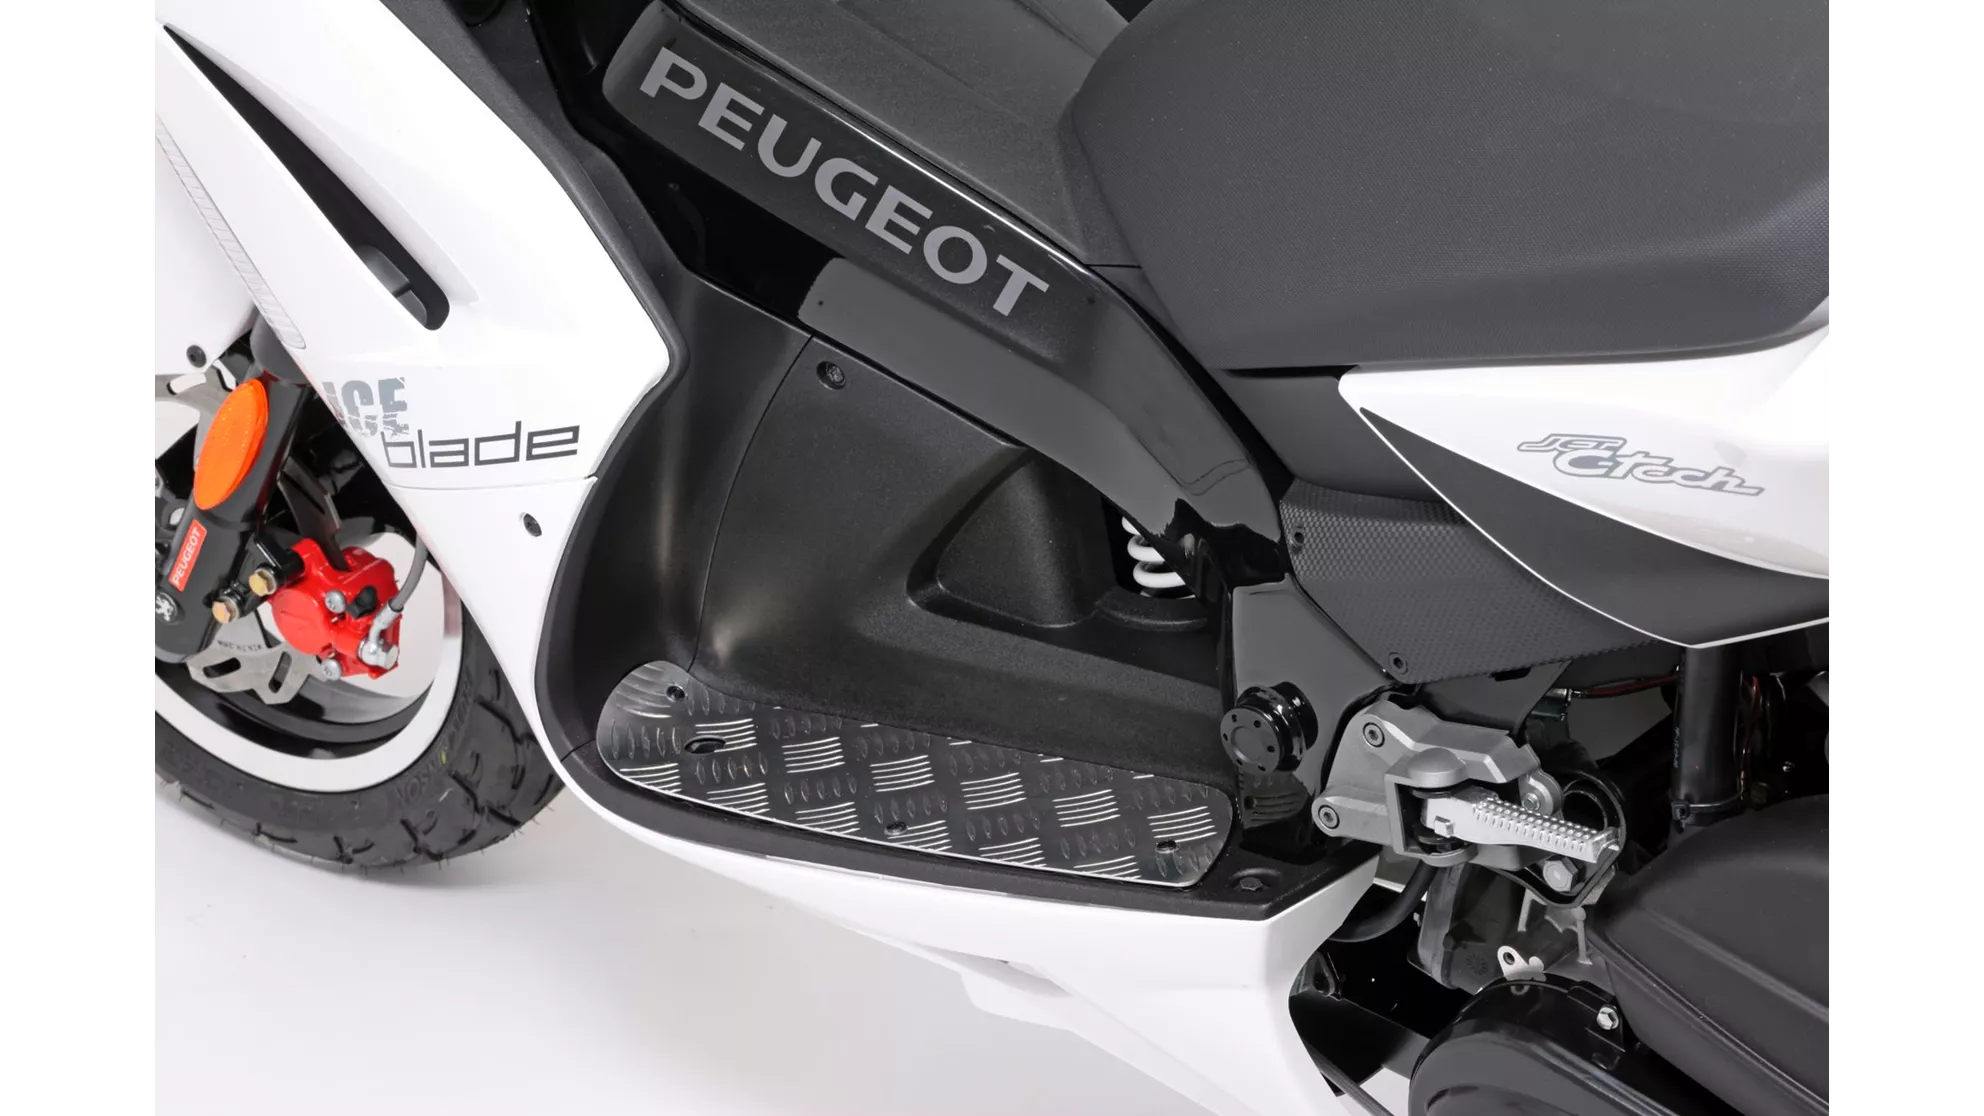 Picture Peugeot Jet Force 50 Iceblade